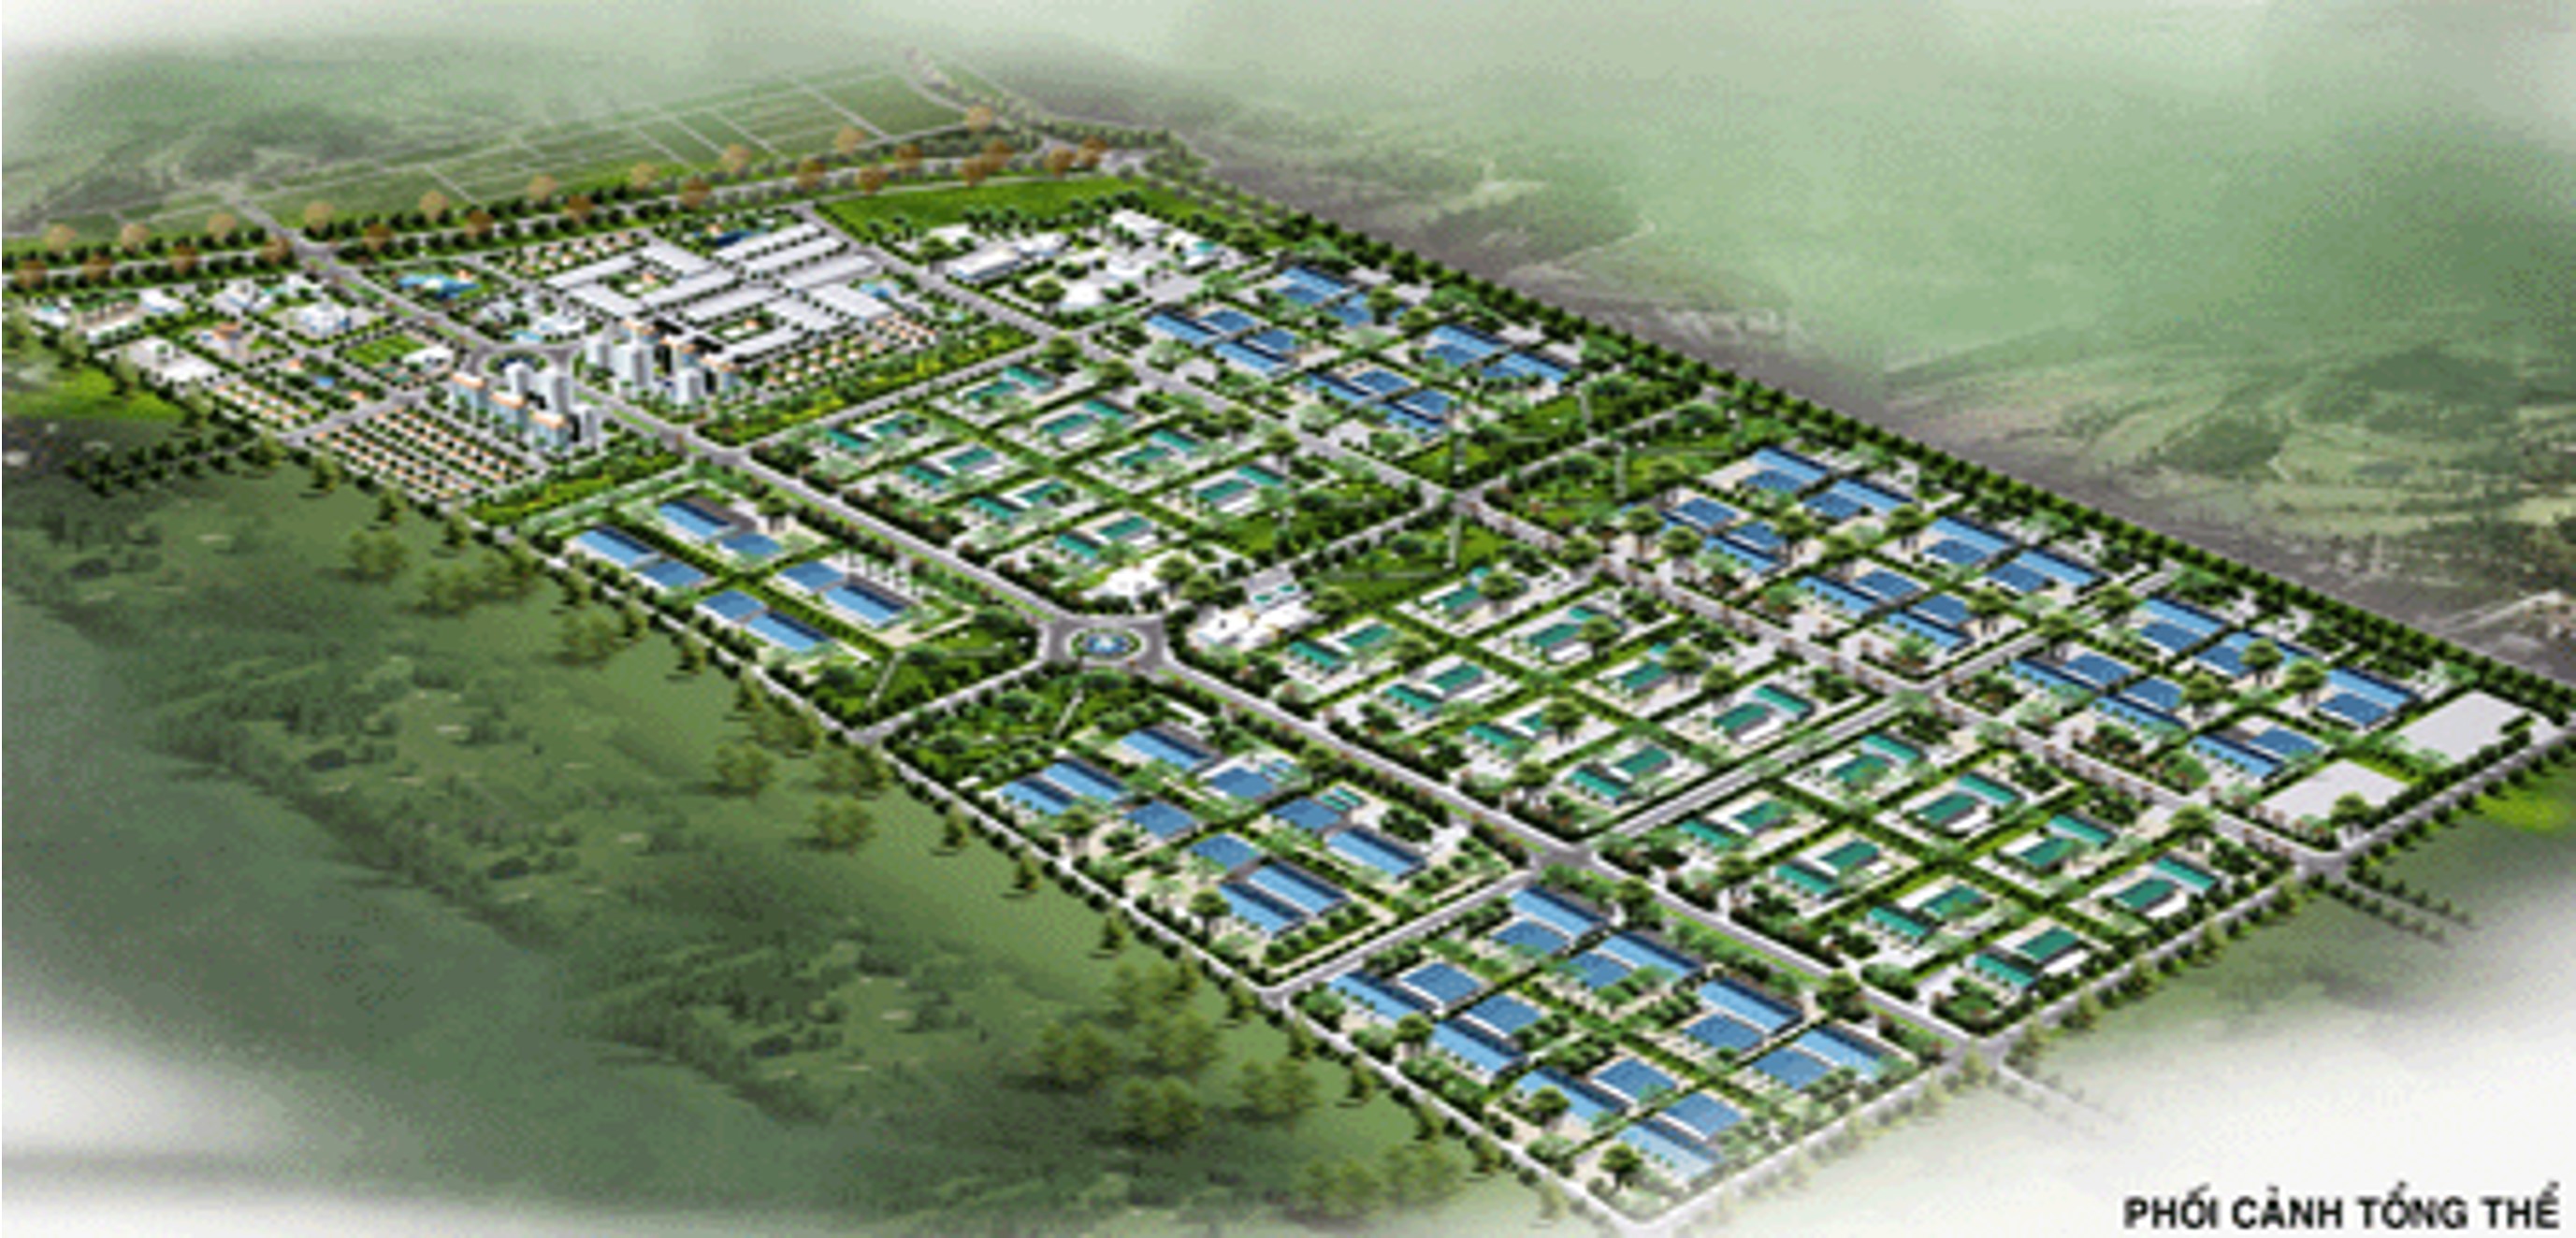 Thuan Thanh 2 Industrial Park